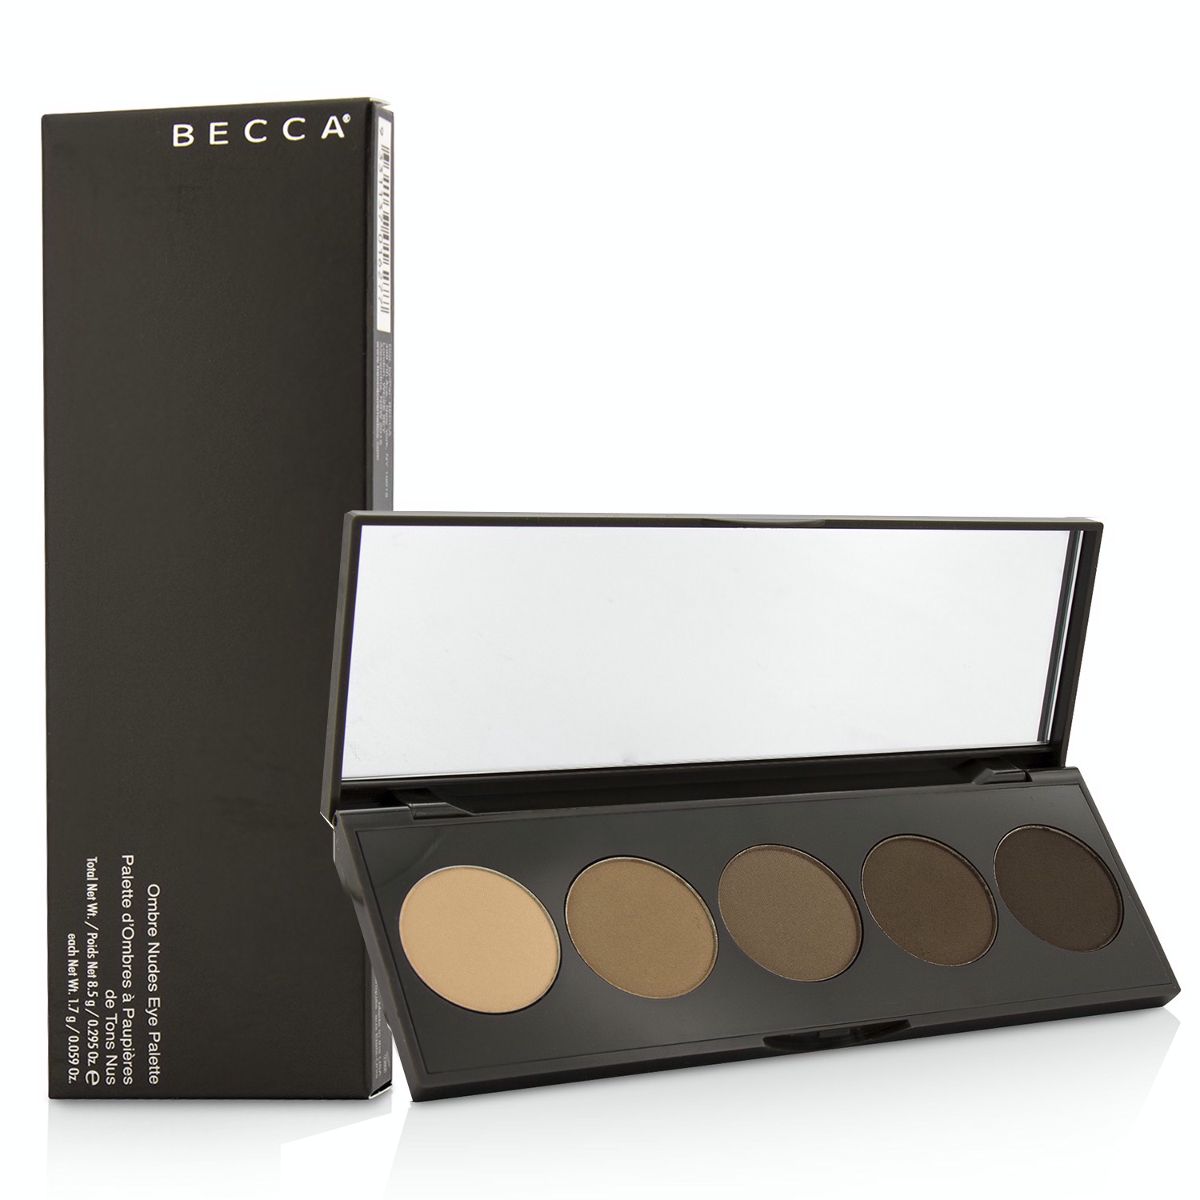 Ombre Nudes Eye Palette Becca Image